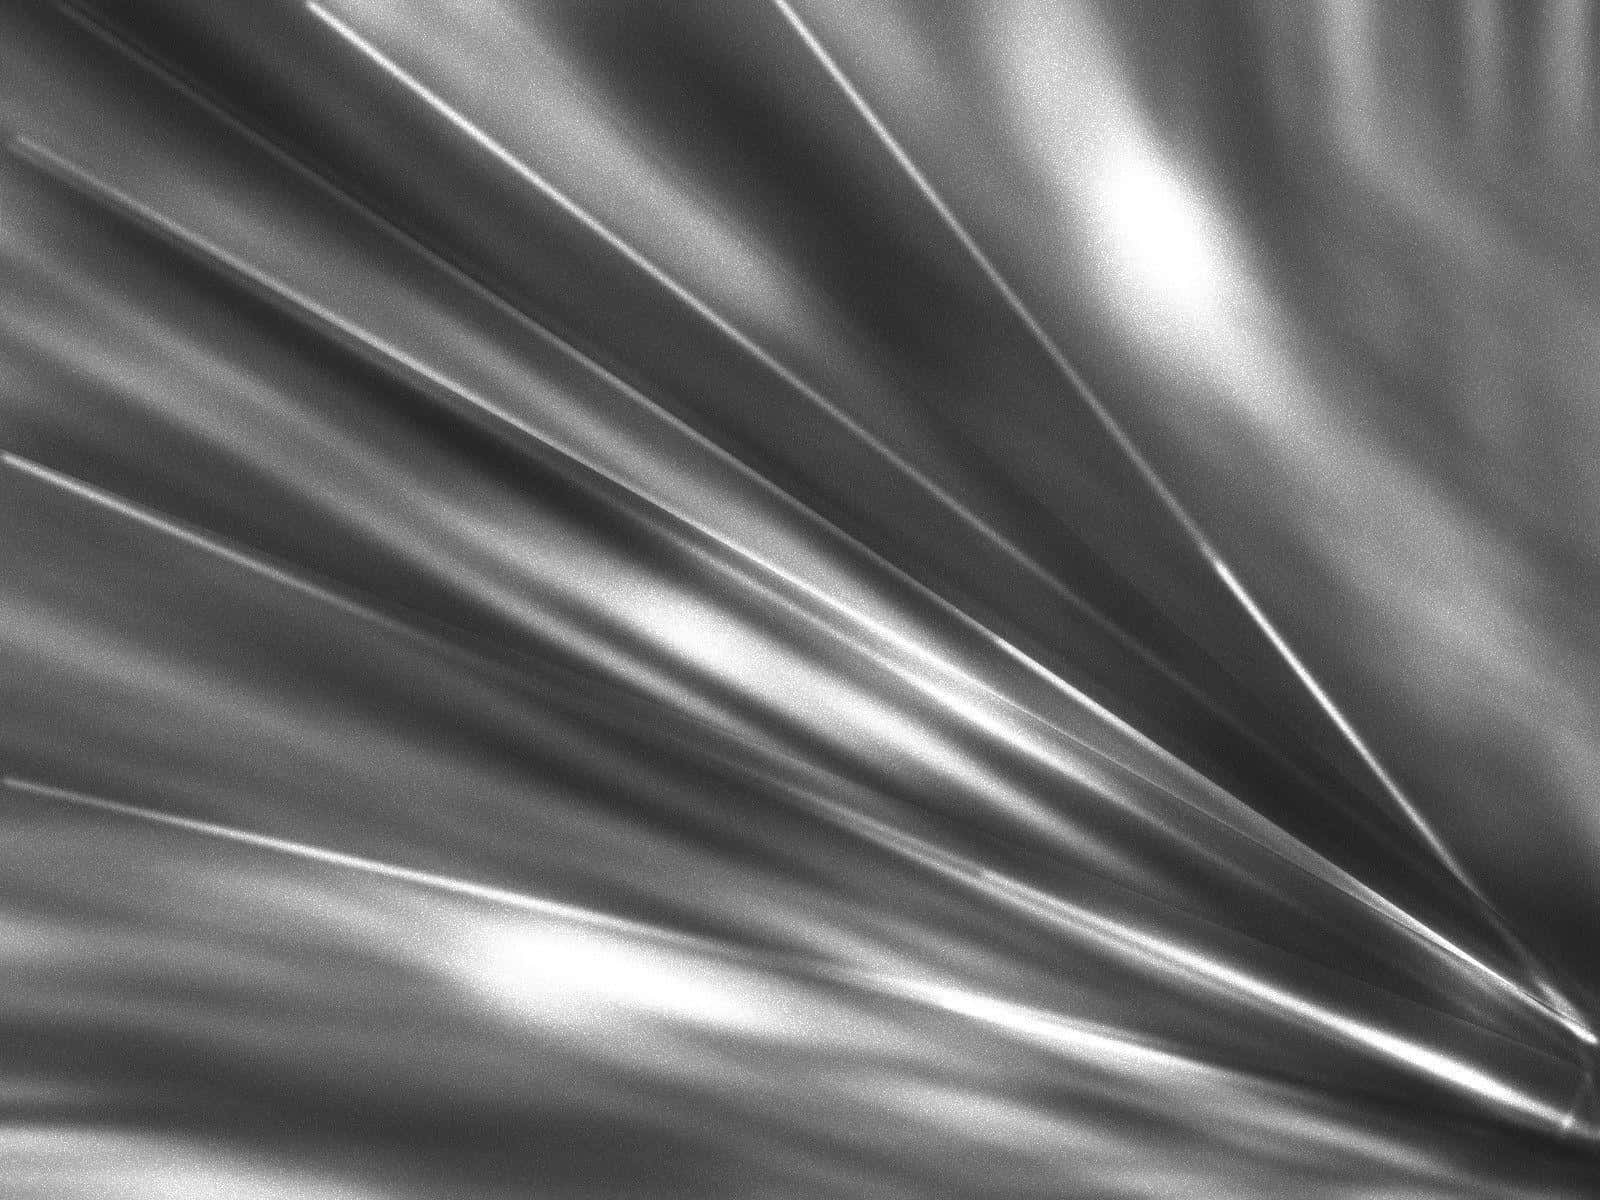 Black And Silver Chrome Abstract Desktop Wallpaper